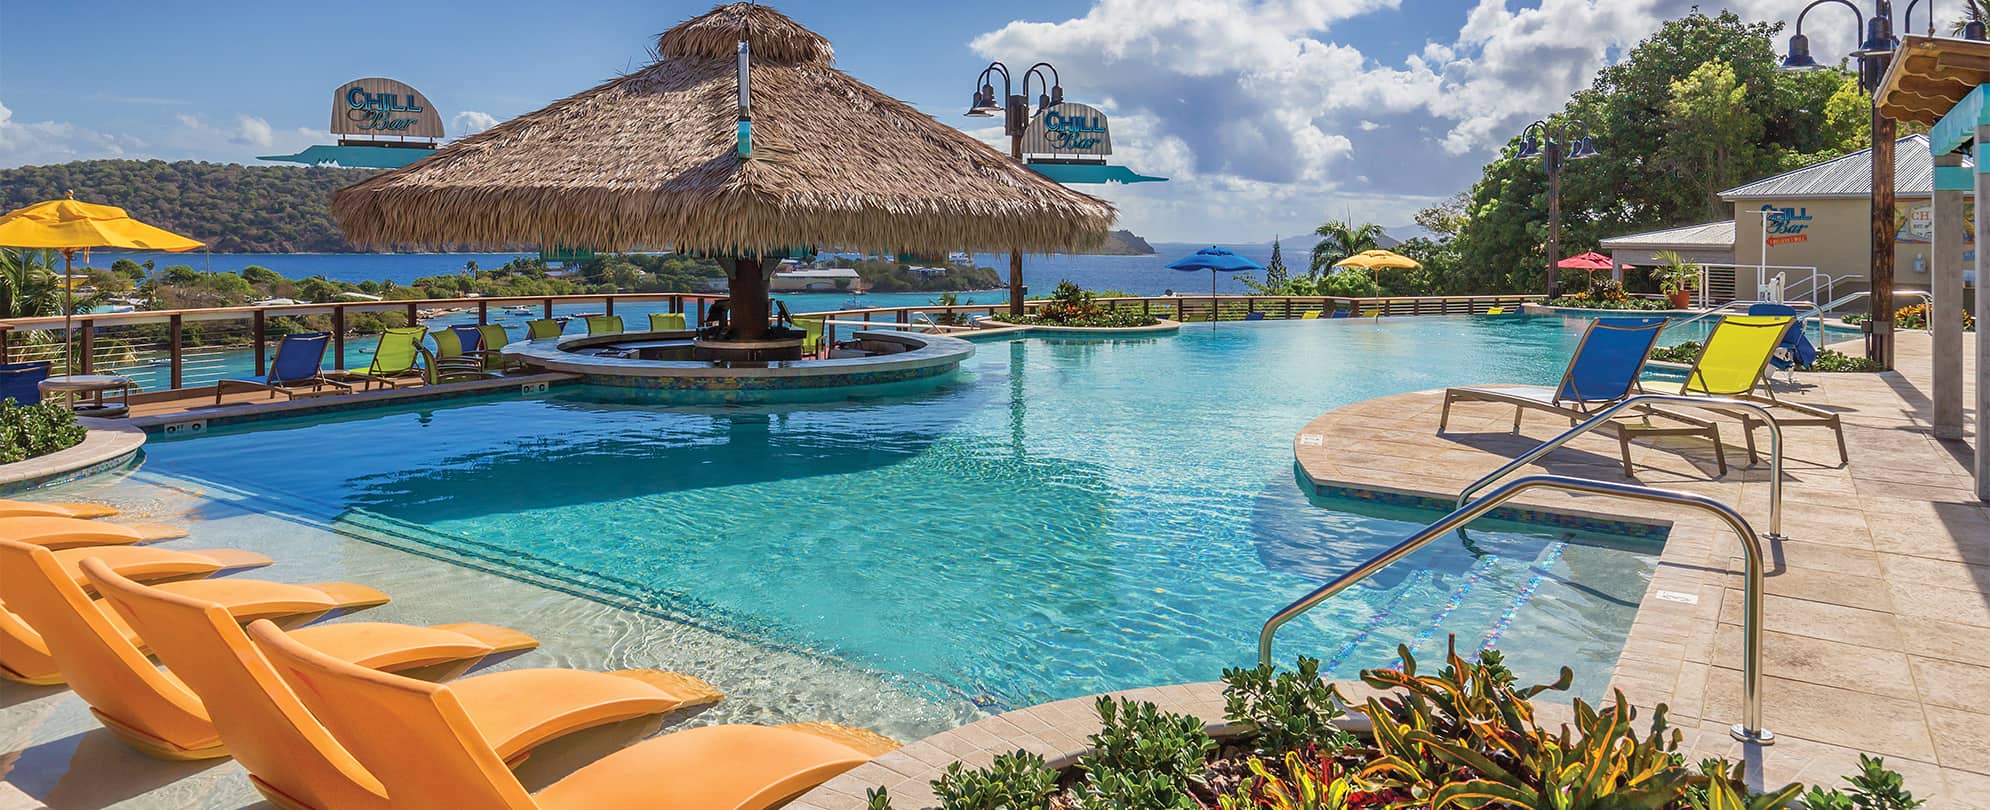 The oceanfront pool and swim-up tiki bar at Margaritaville Vacation Club by Wyndham - St. Thomas, a timeshare resort.